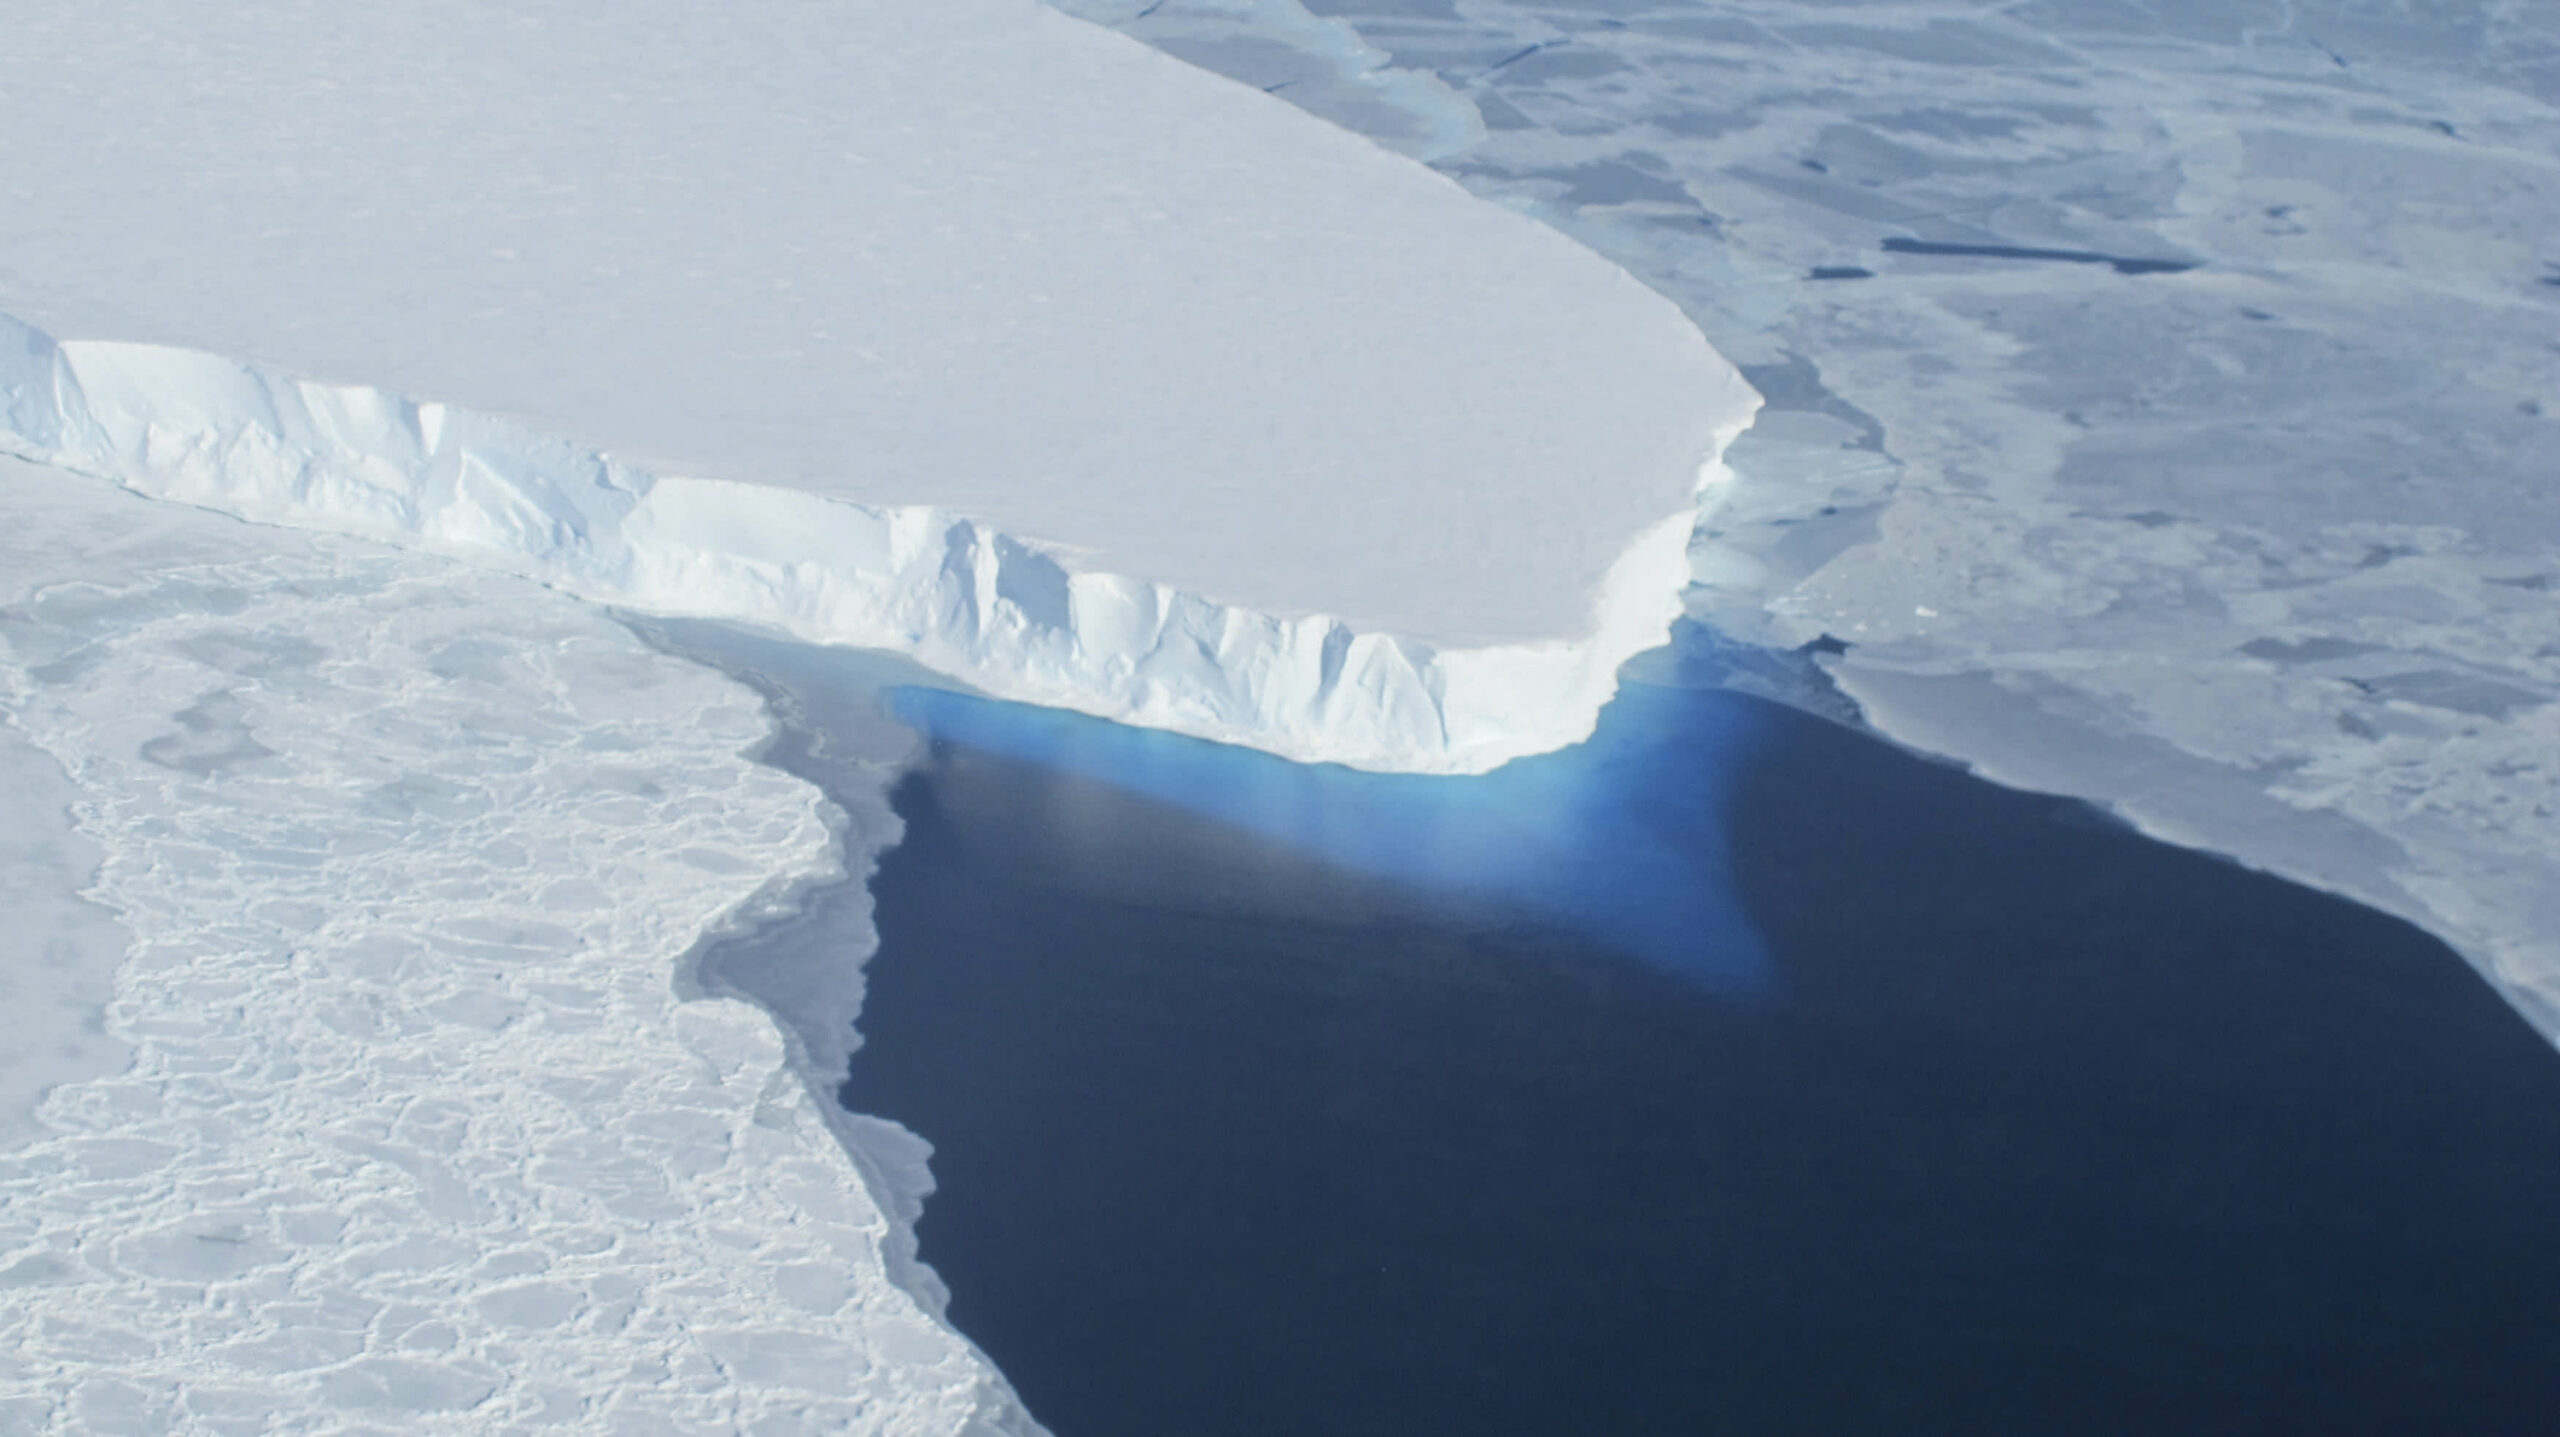 A major Antarctic ice shelf could shatter within five years